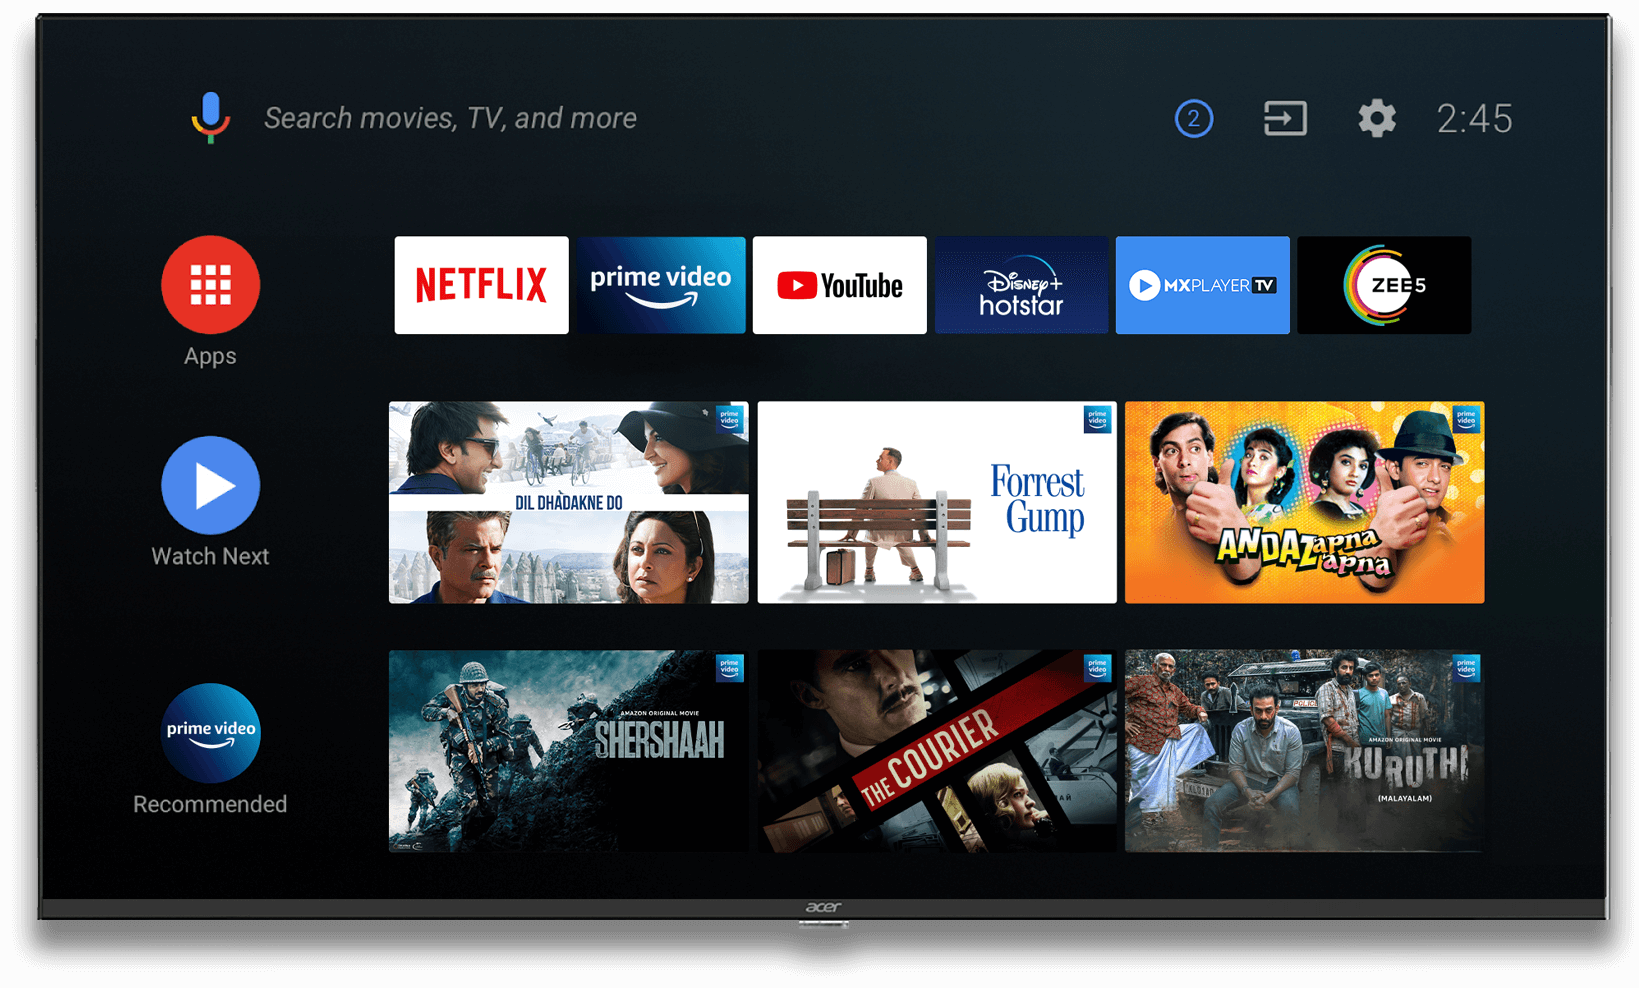 The Universe of Android tv
